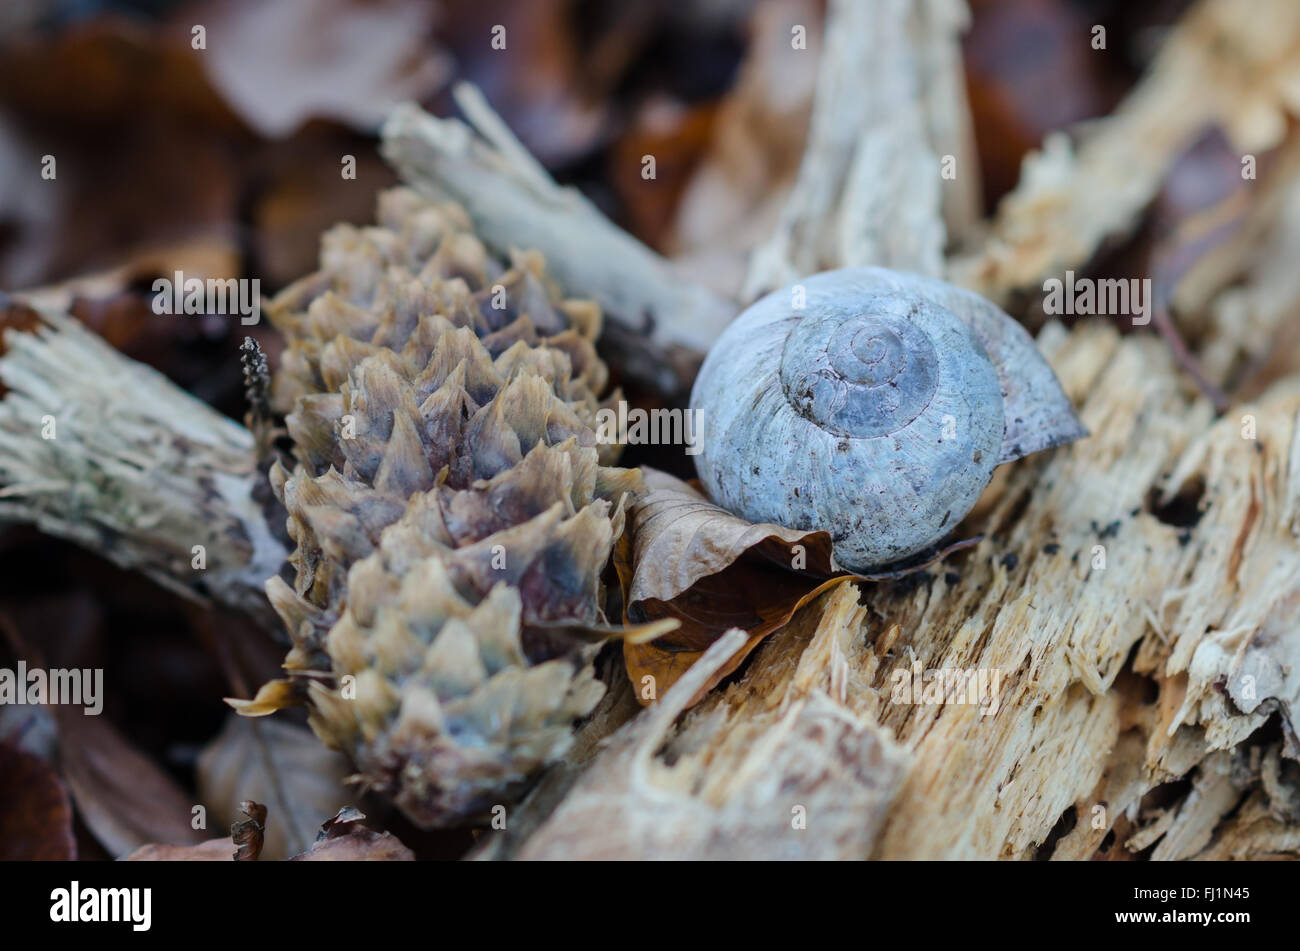 Potpourri on wood floor with snail shell, cone and rotten wood Stock Photo